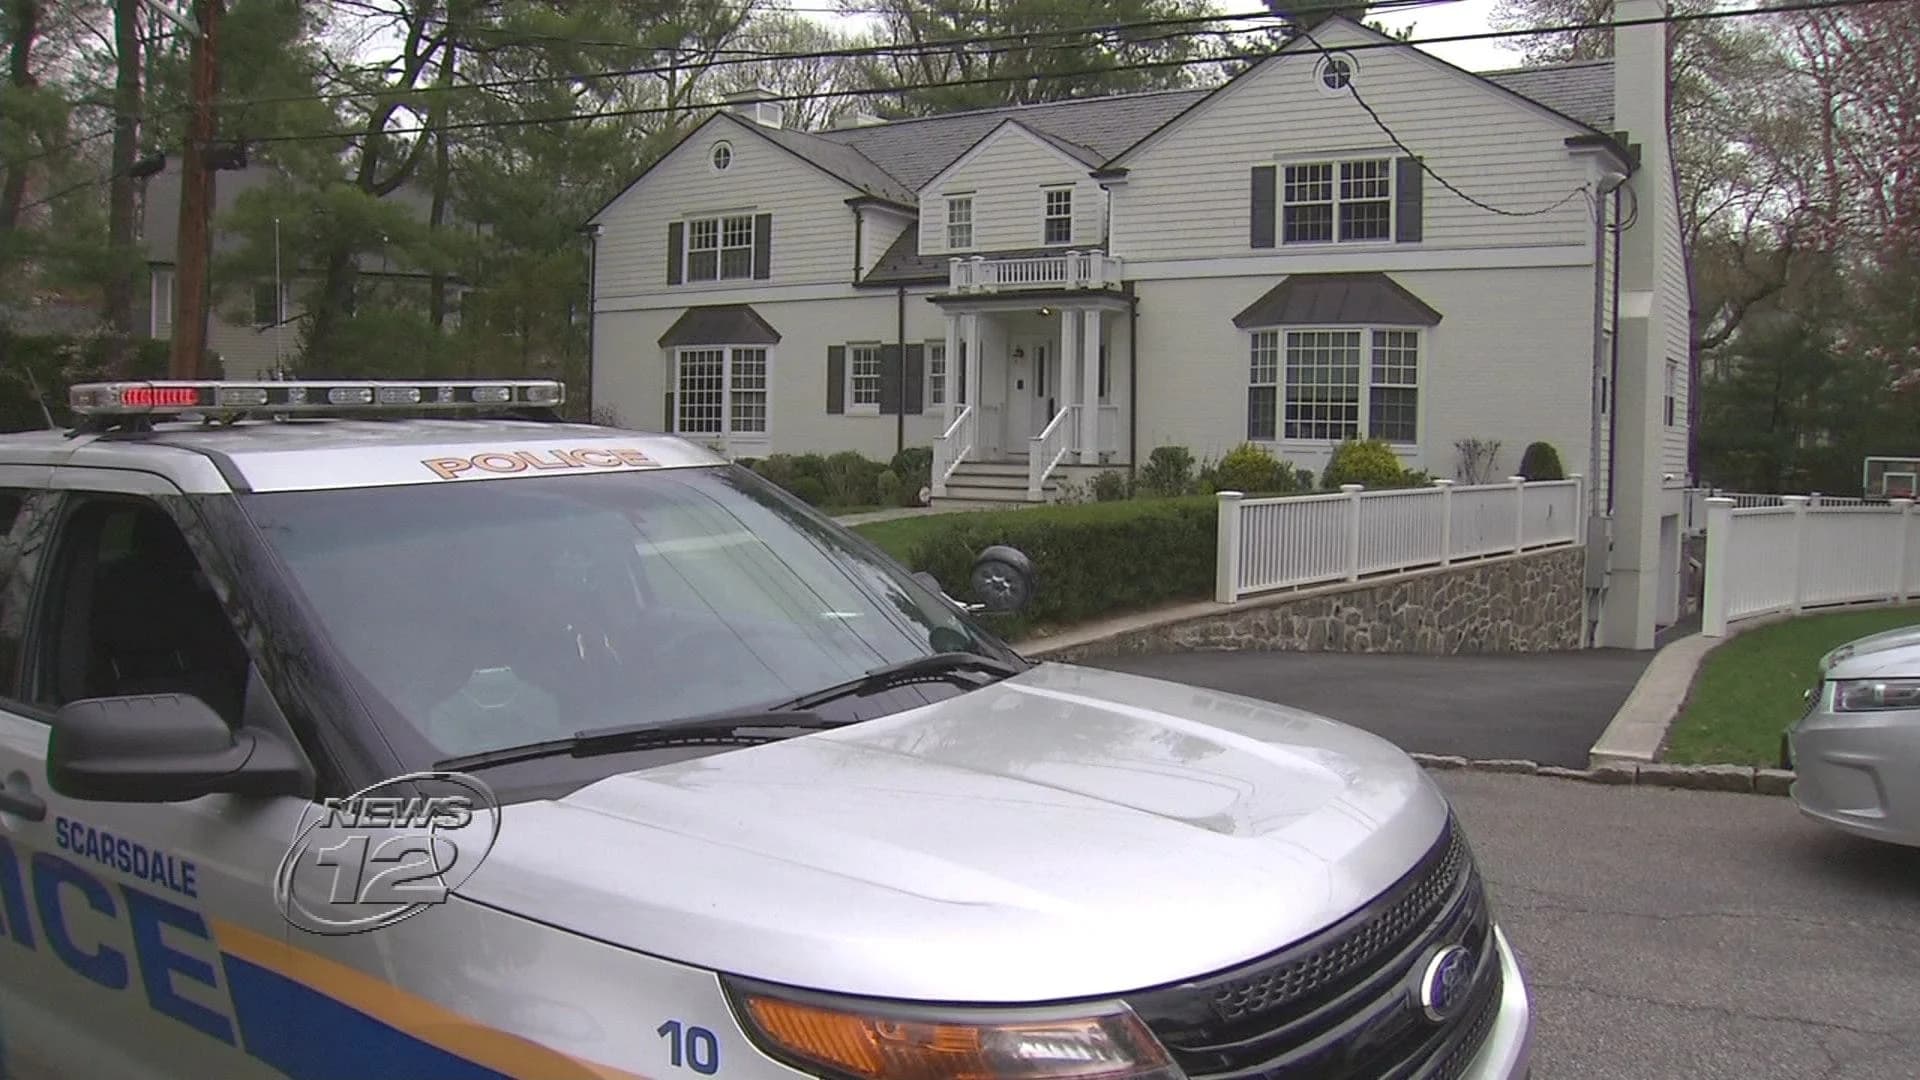 Scarsdale couple awoken by home invaders